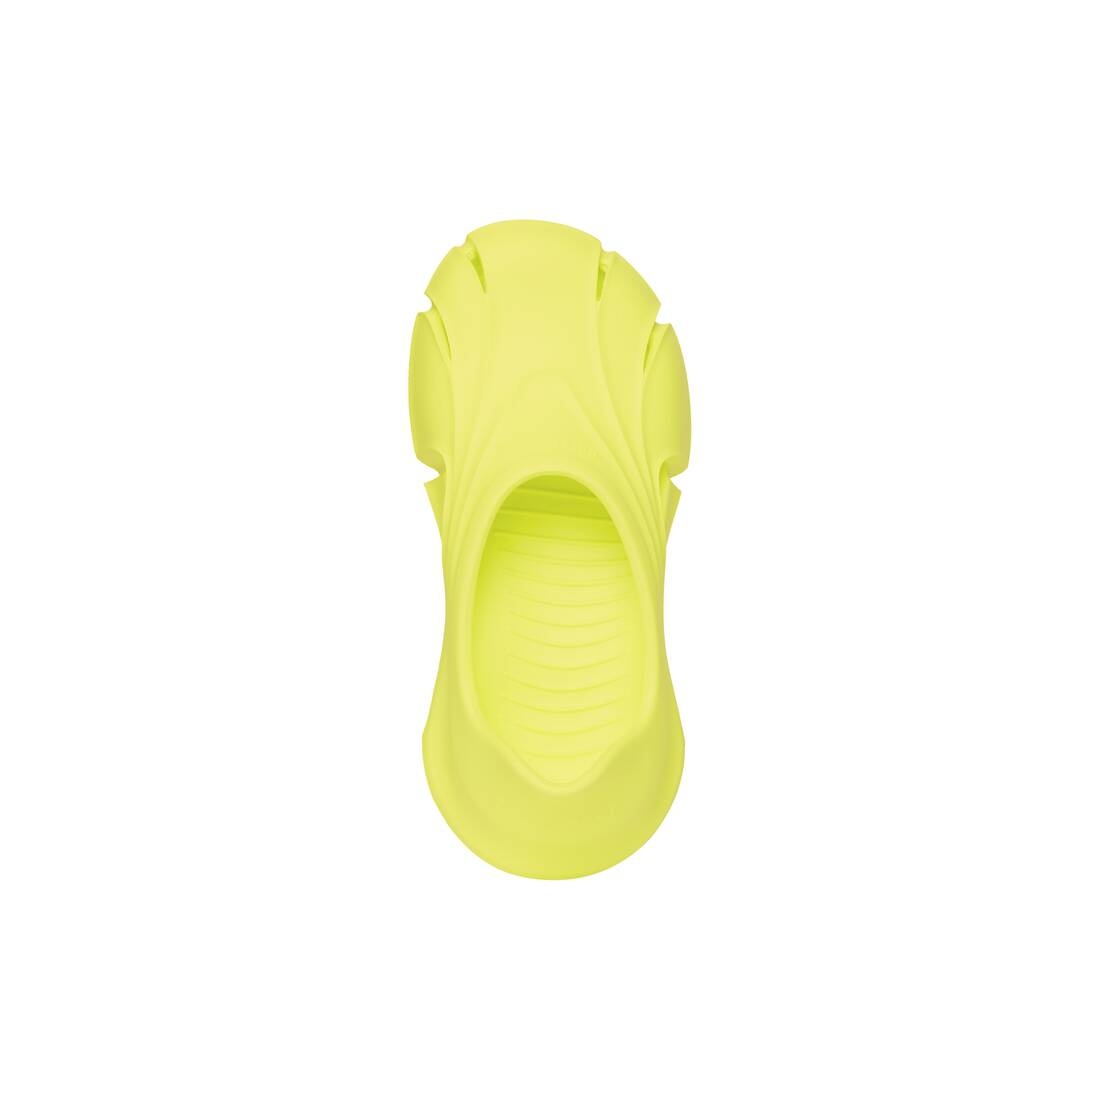 Men's Mold Closed in Yellow - 6